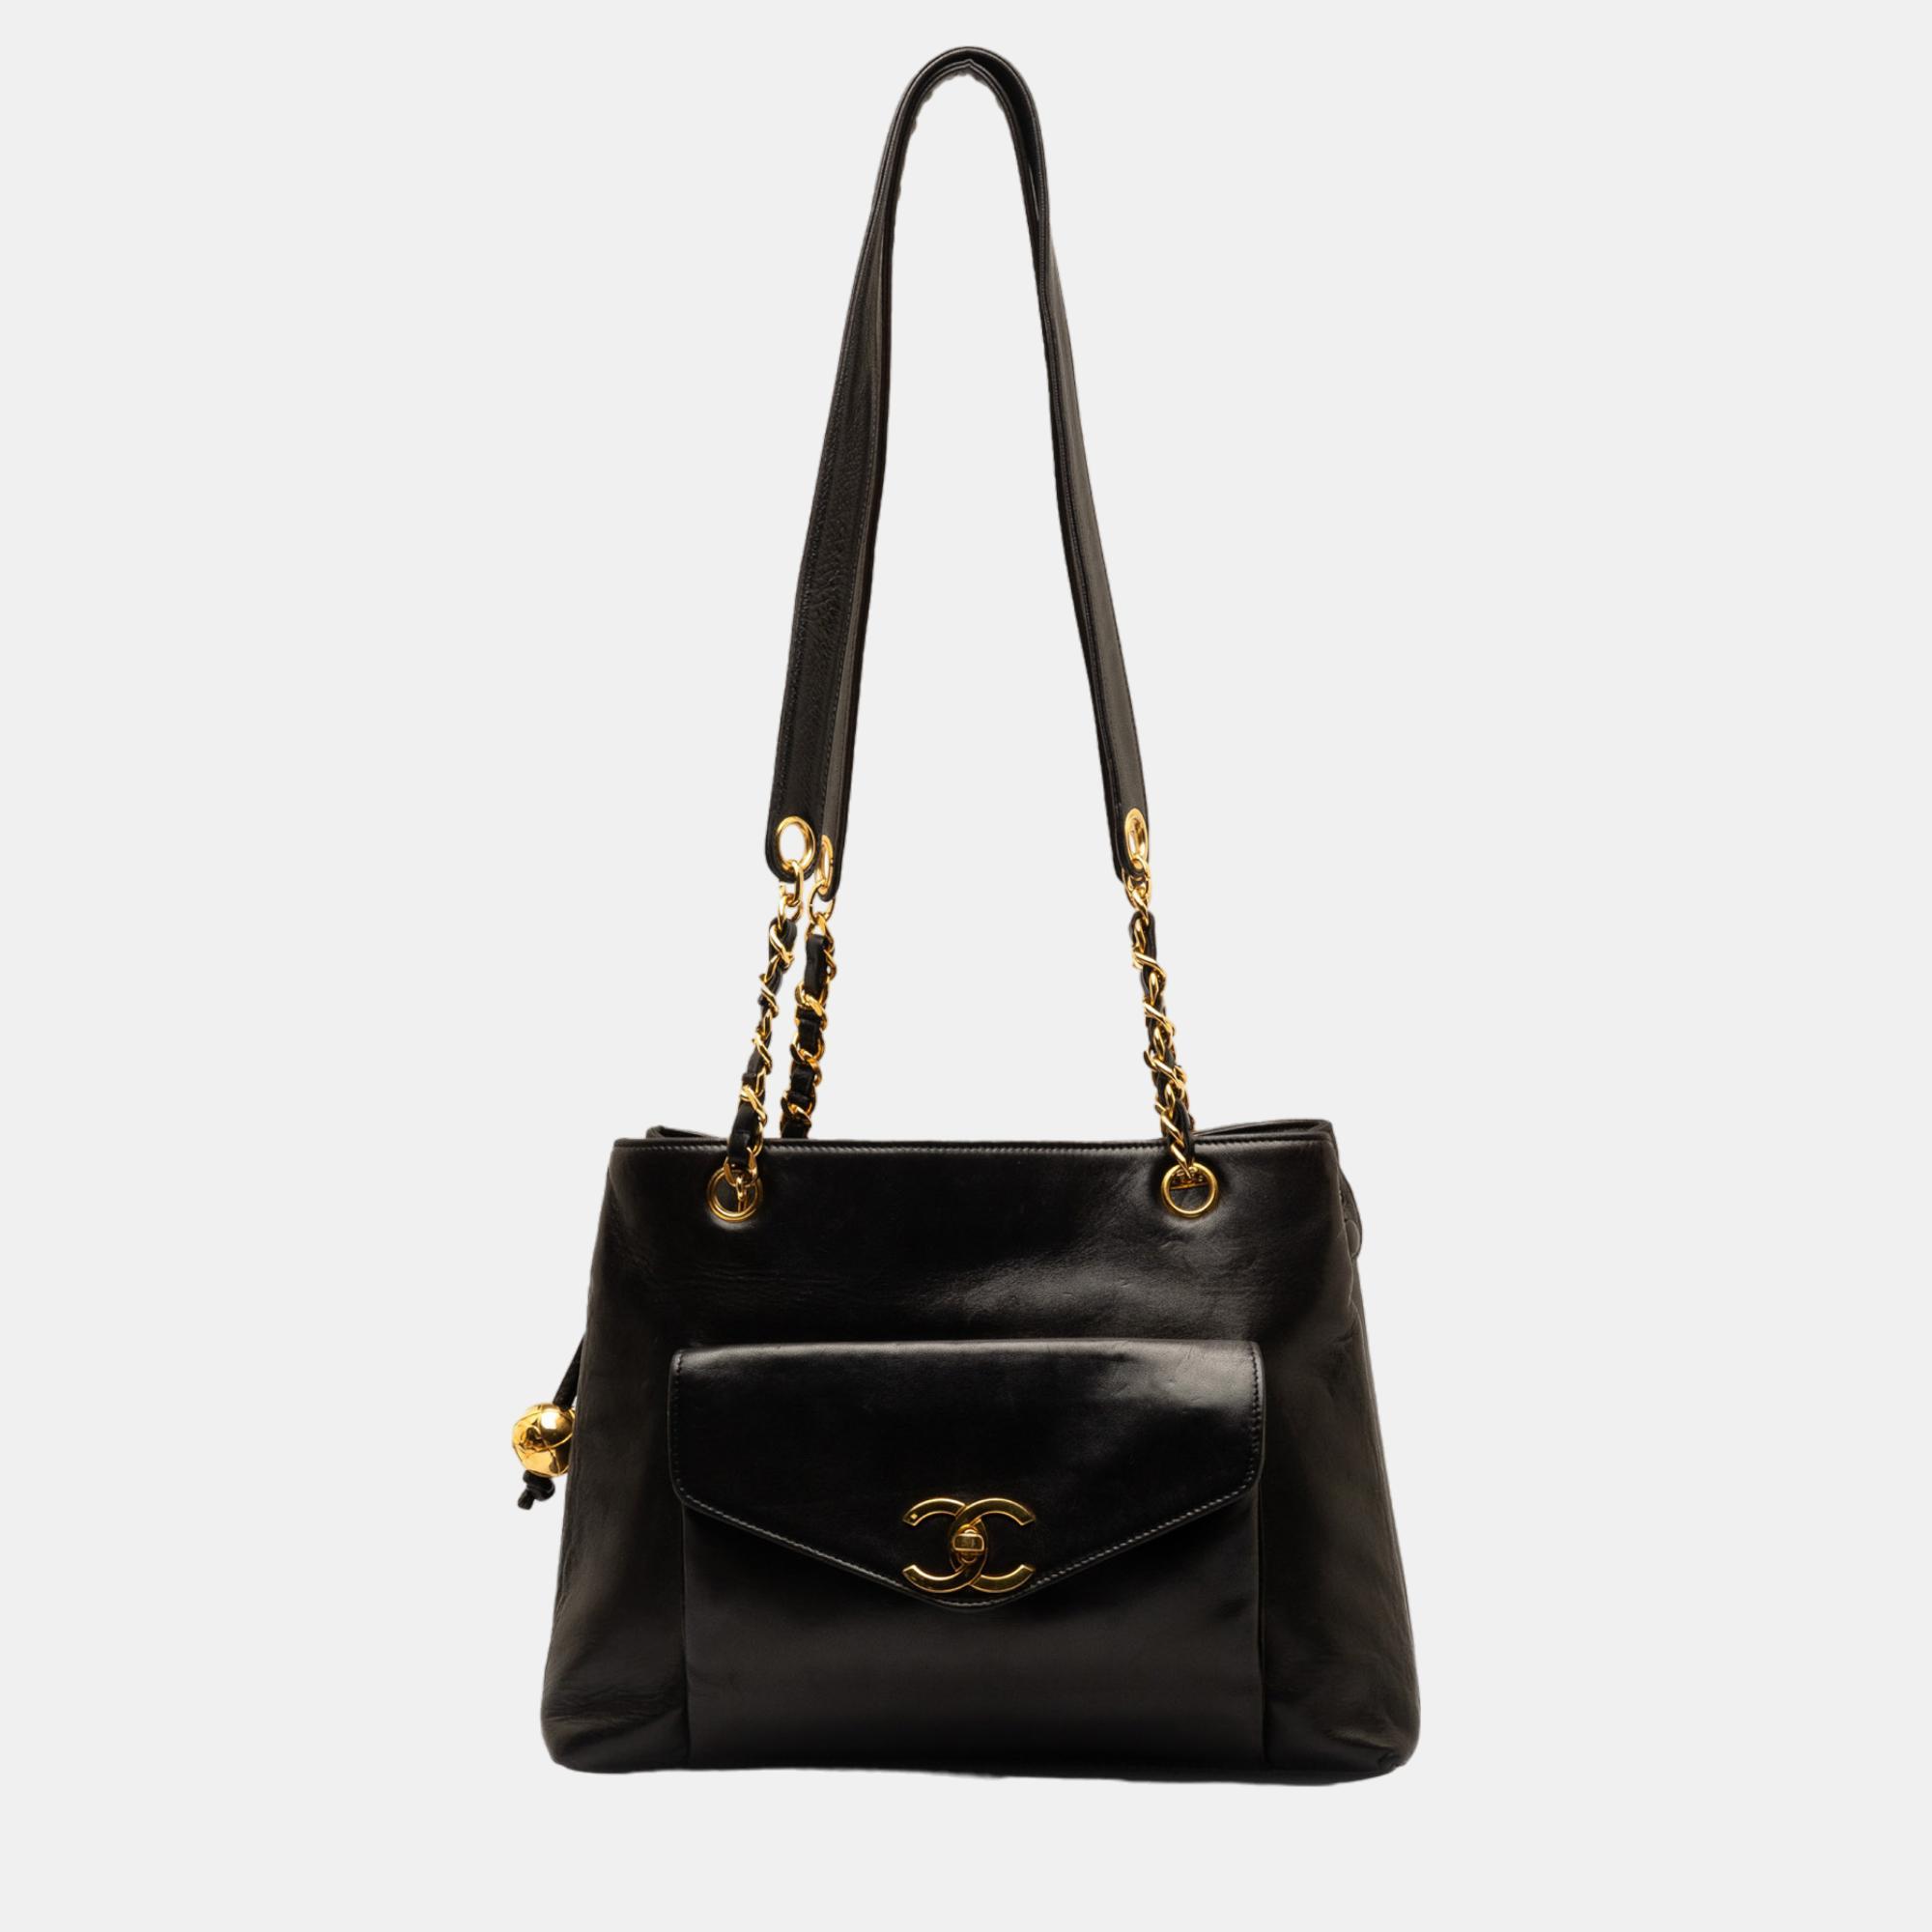 This tote bag features a lambskin leather body a curb chain strap an exterior flap pocket with turn lock closure a top zip closure and an interior zip pocket.